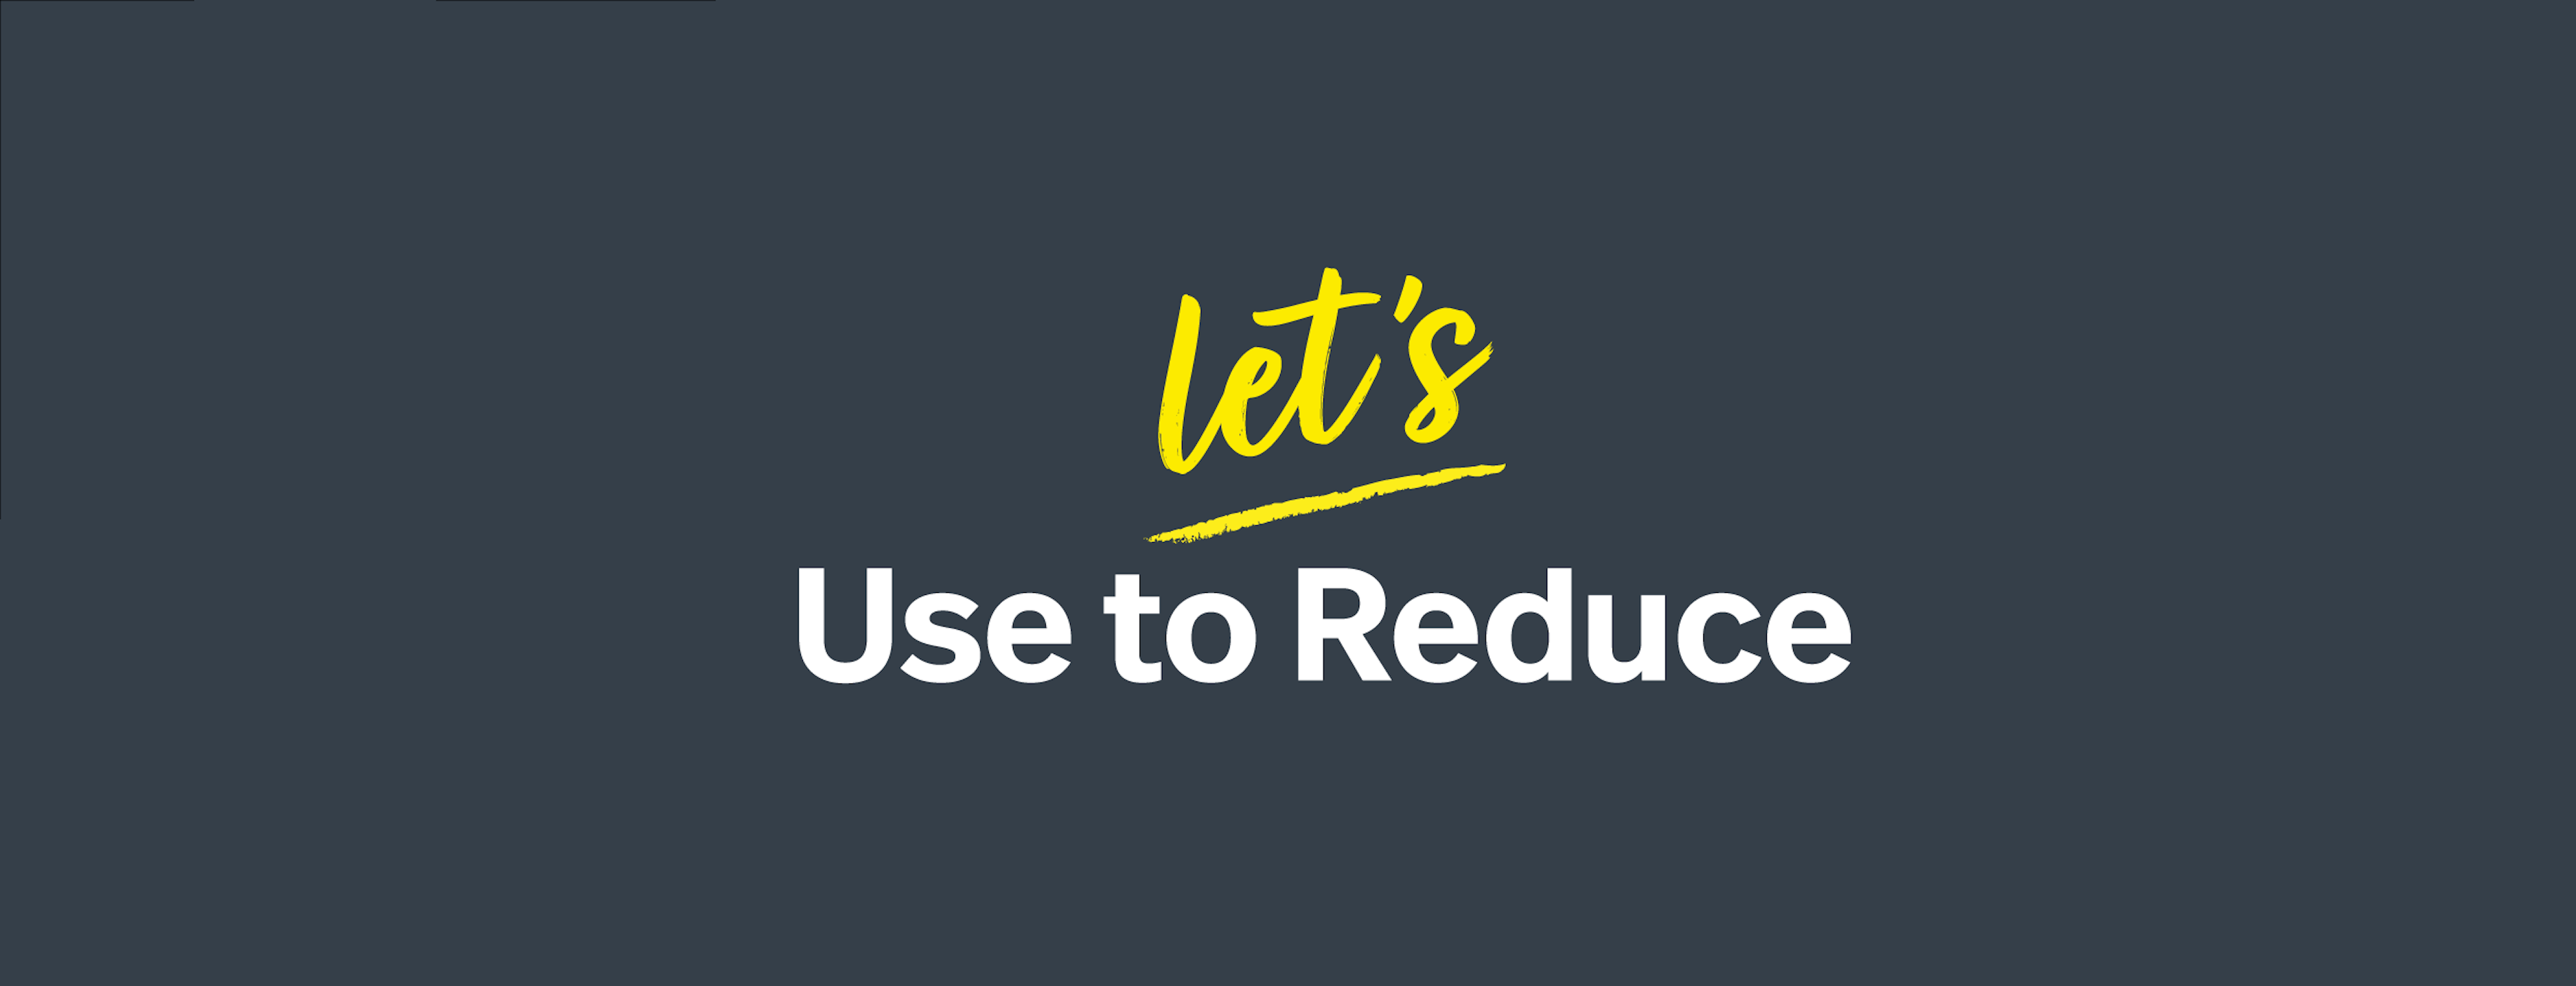 Let's use to reduce